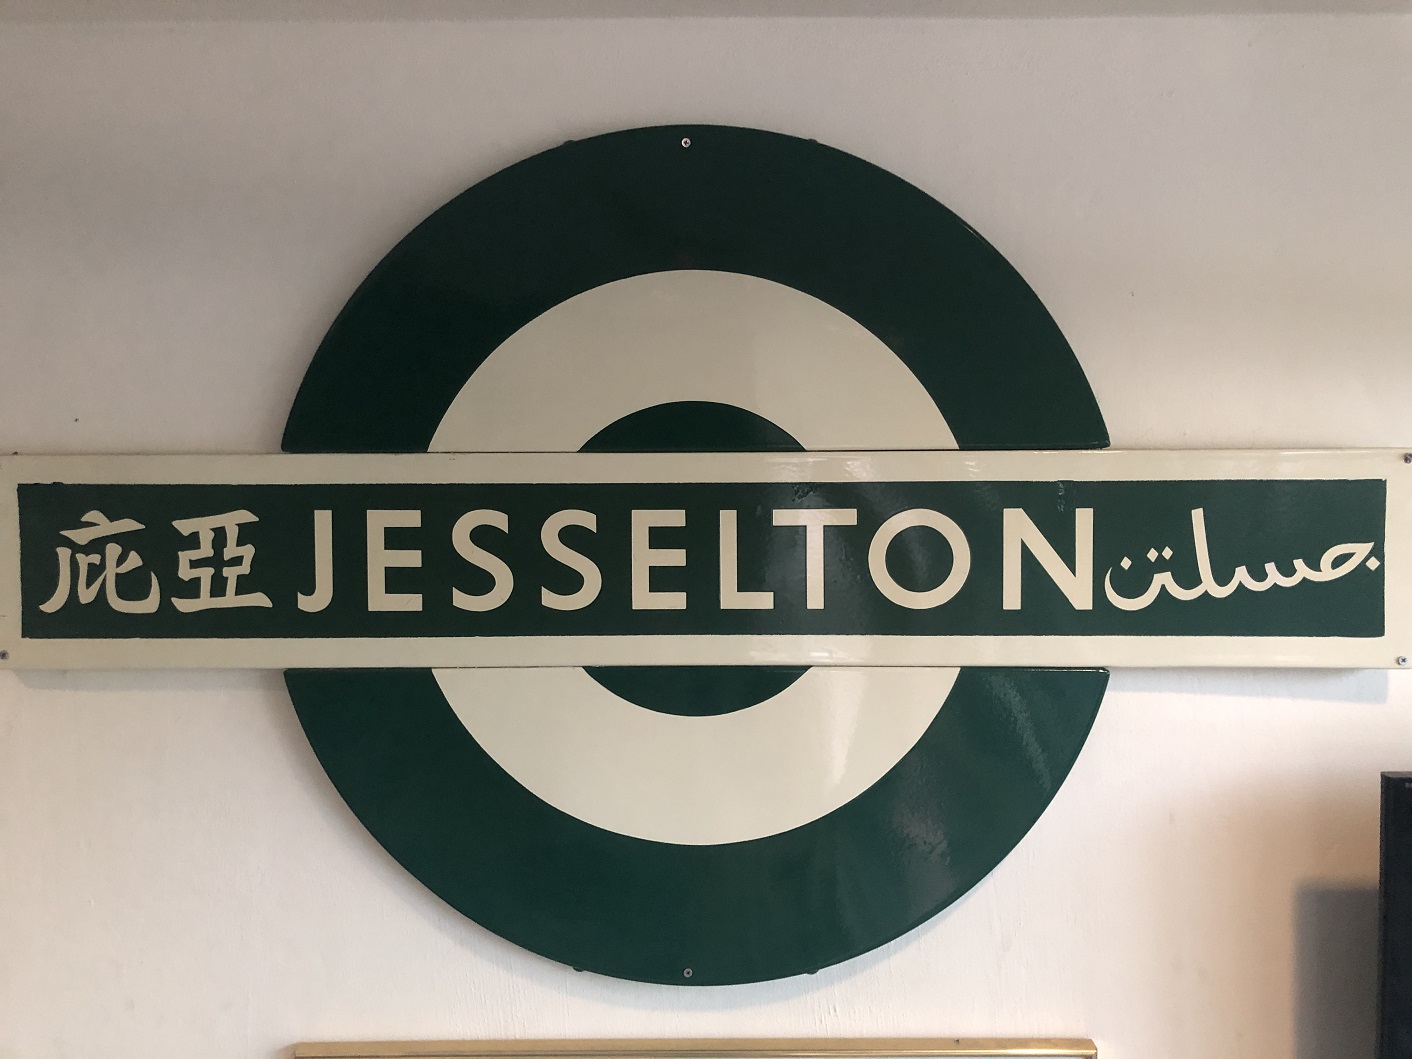  This multi-lingual station sign appears to be British  Art Deco   inspired! 